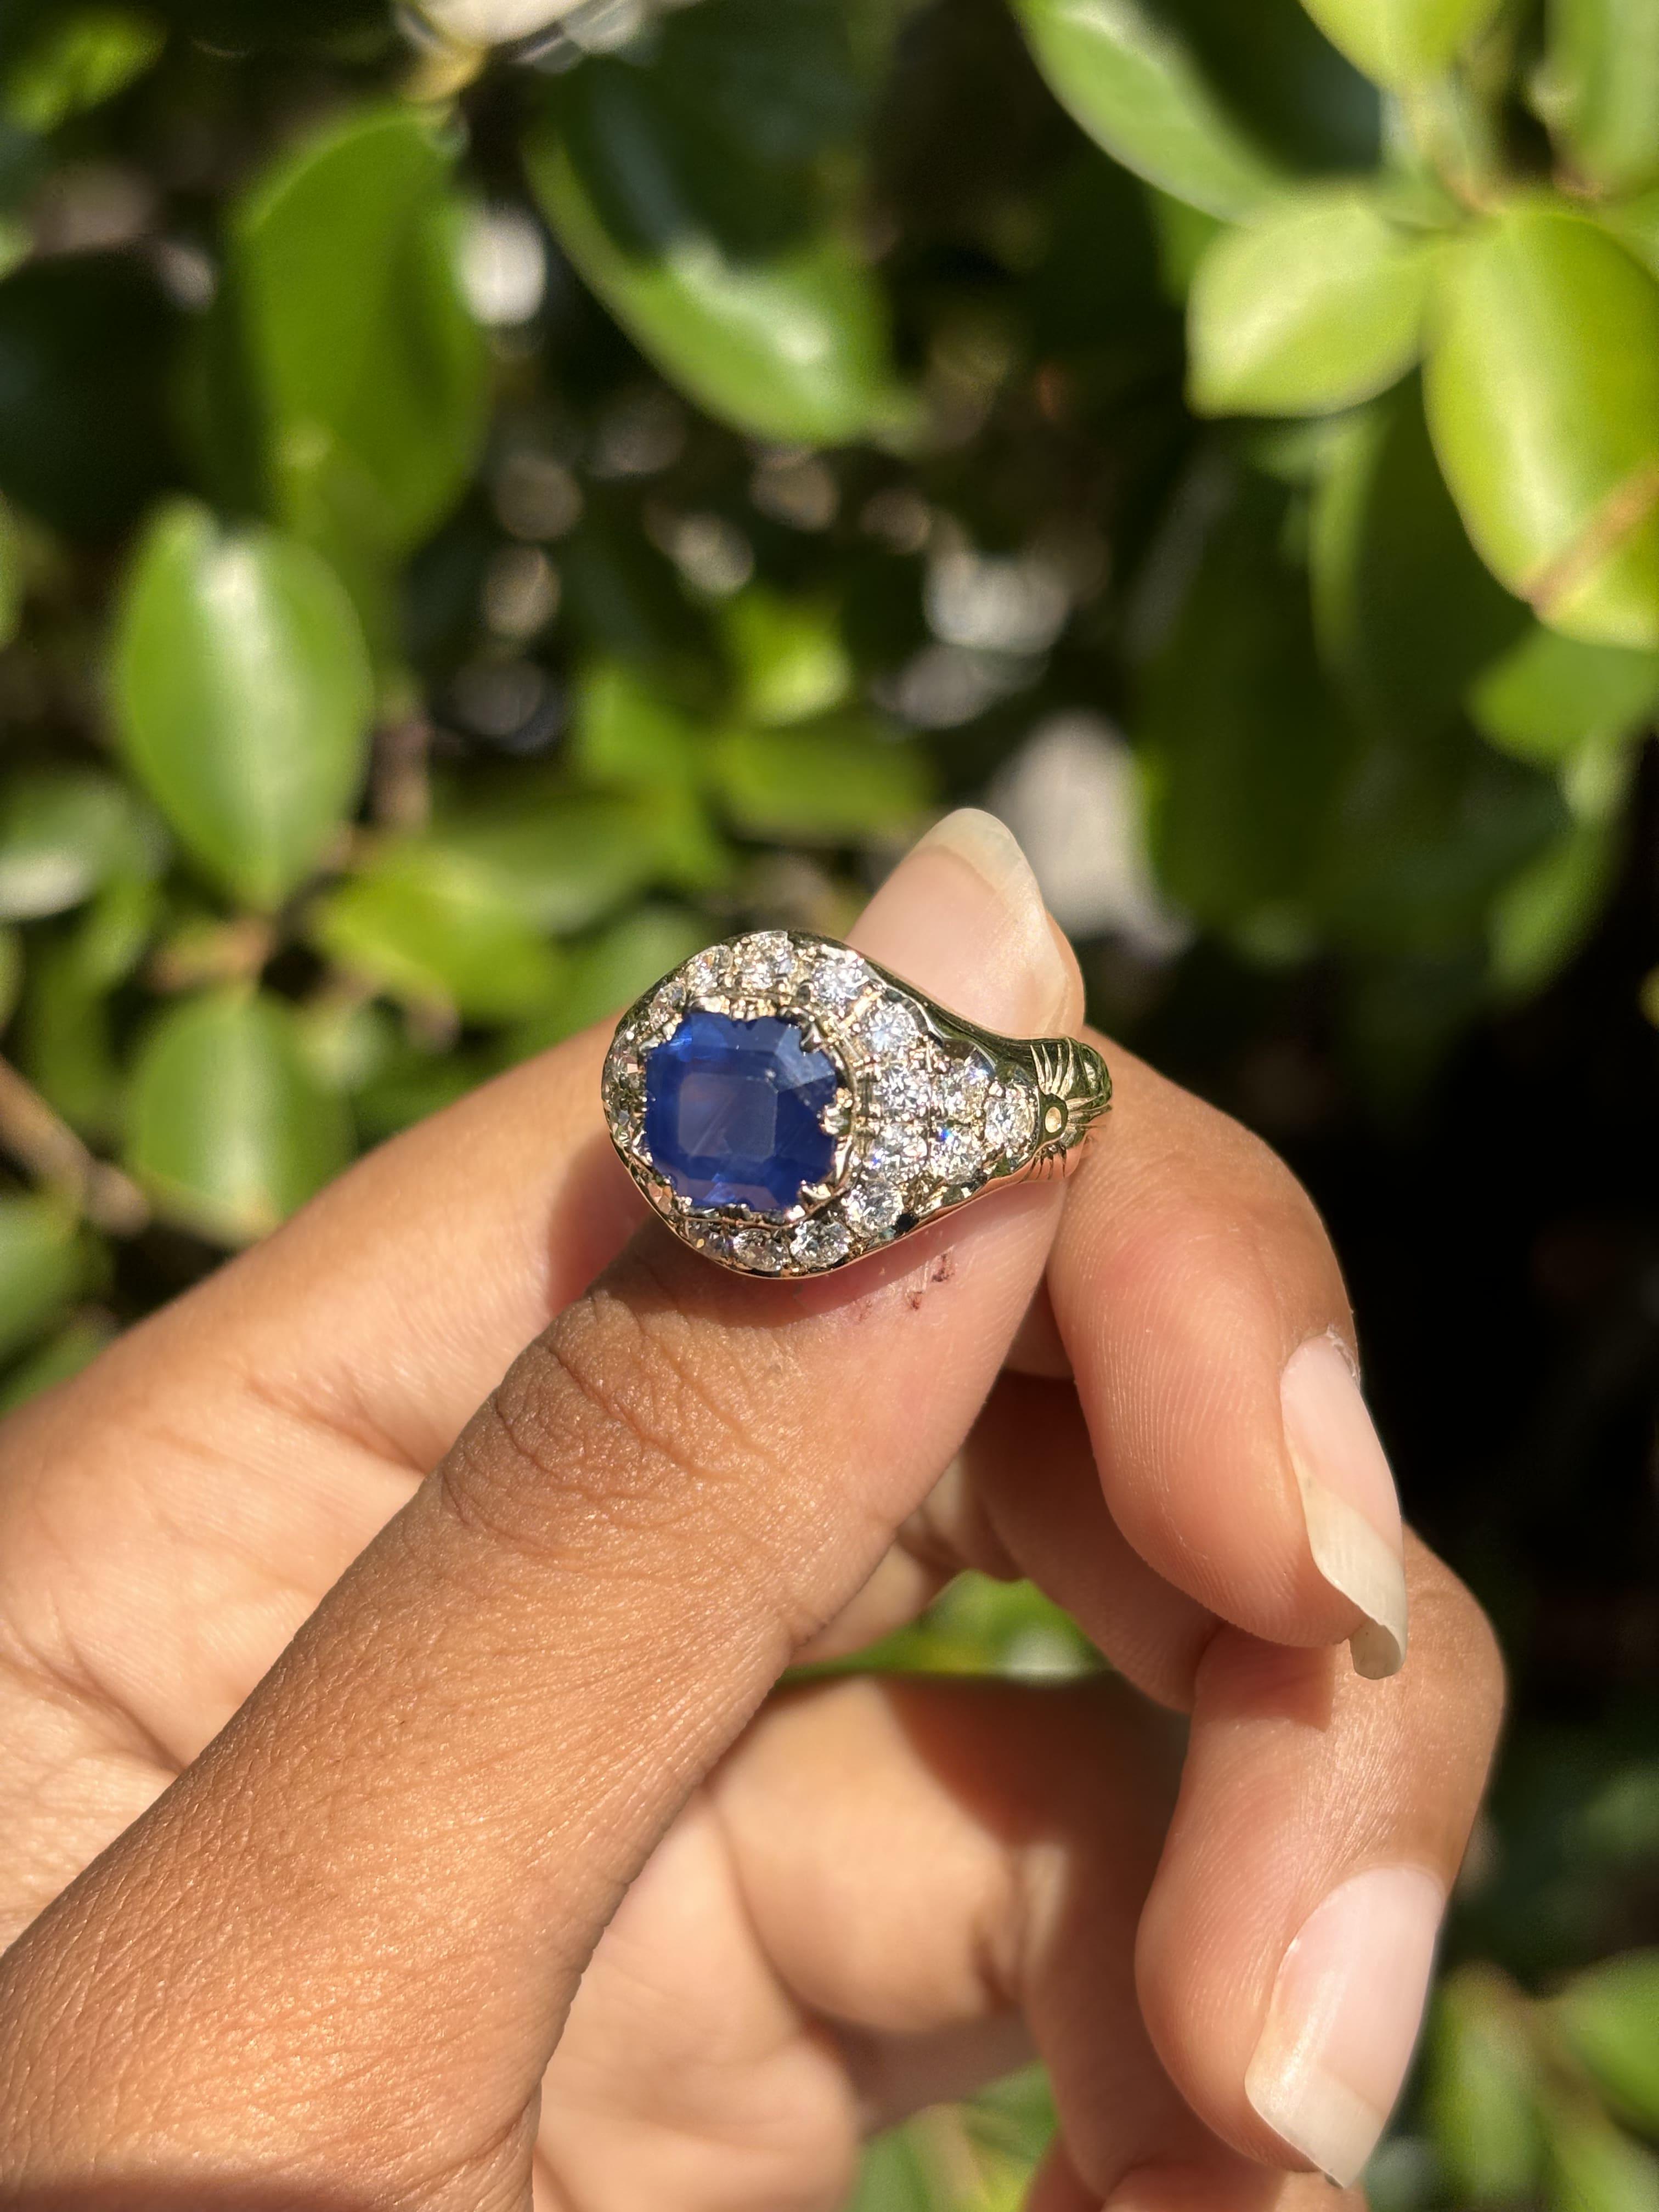   2.64 Carat Royal Blue Sapphire Ring with Old Mine Cut Diamonds in 18K Gold 1